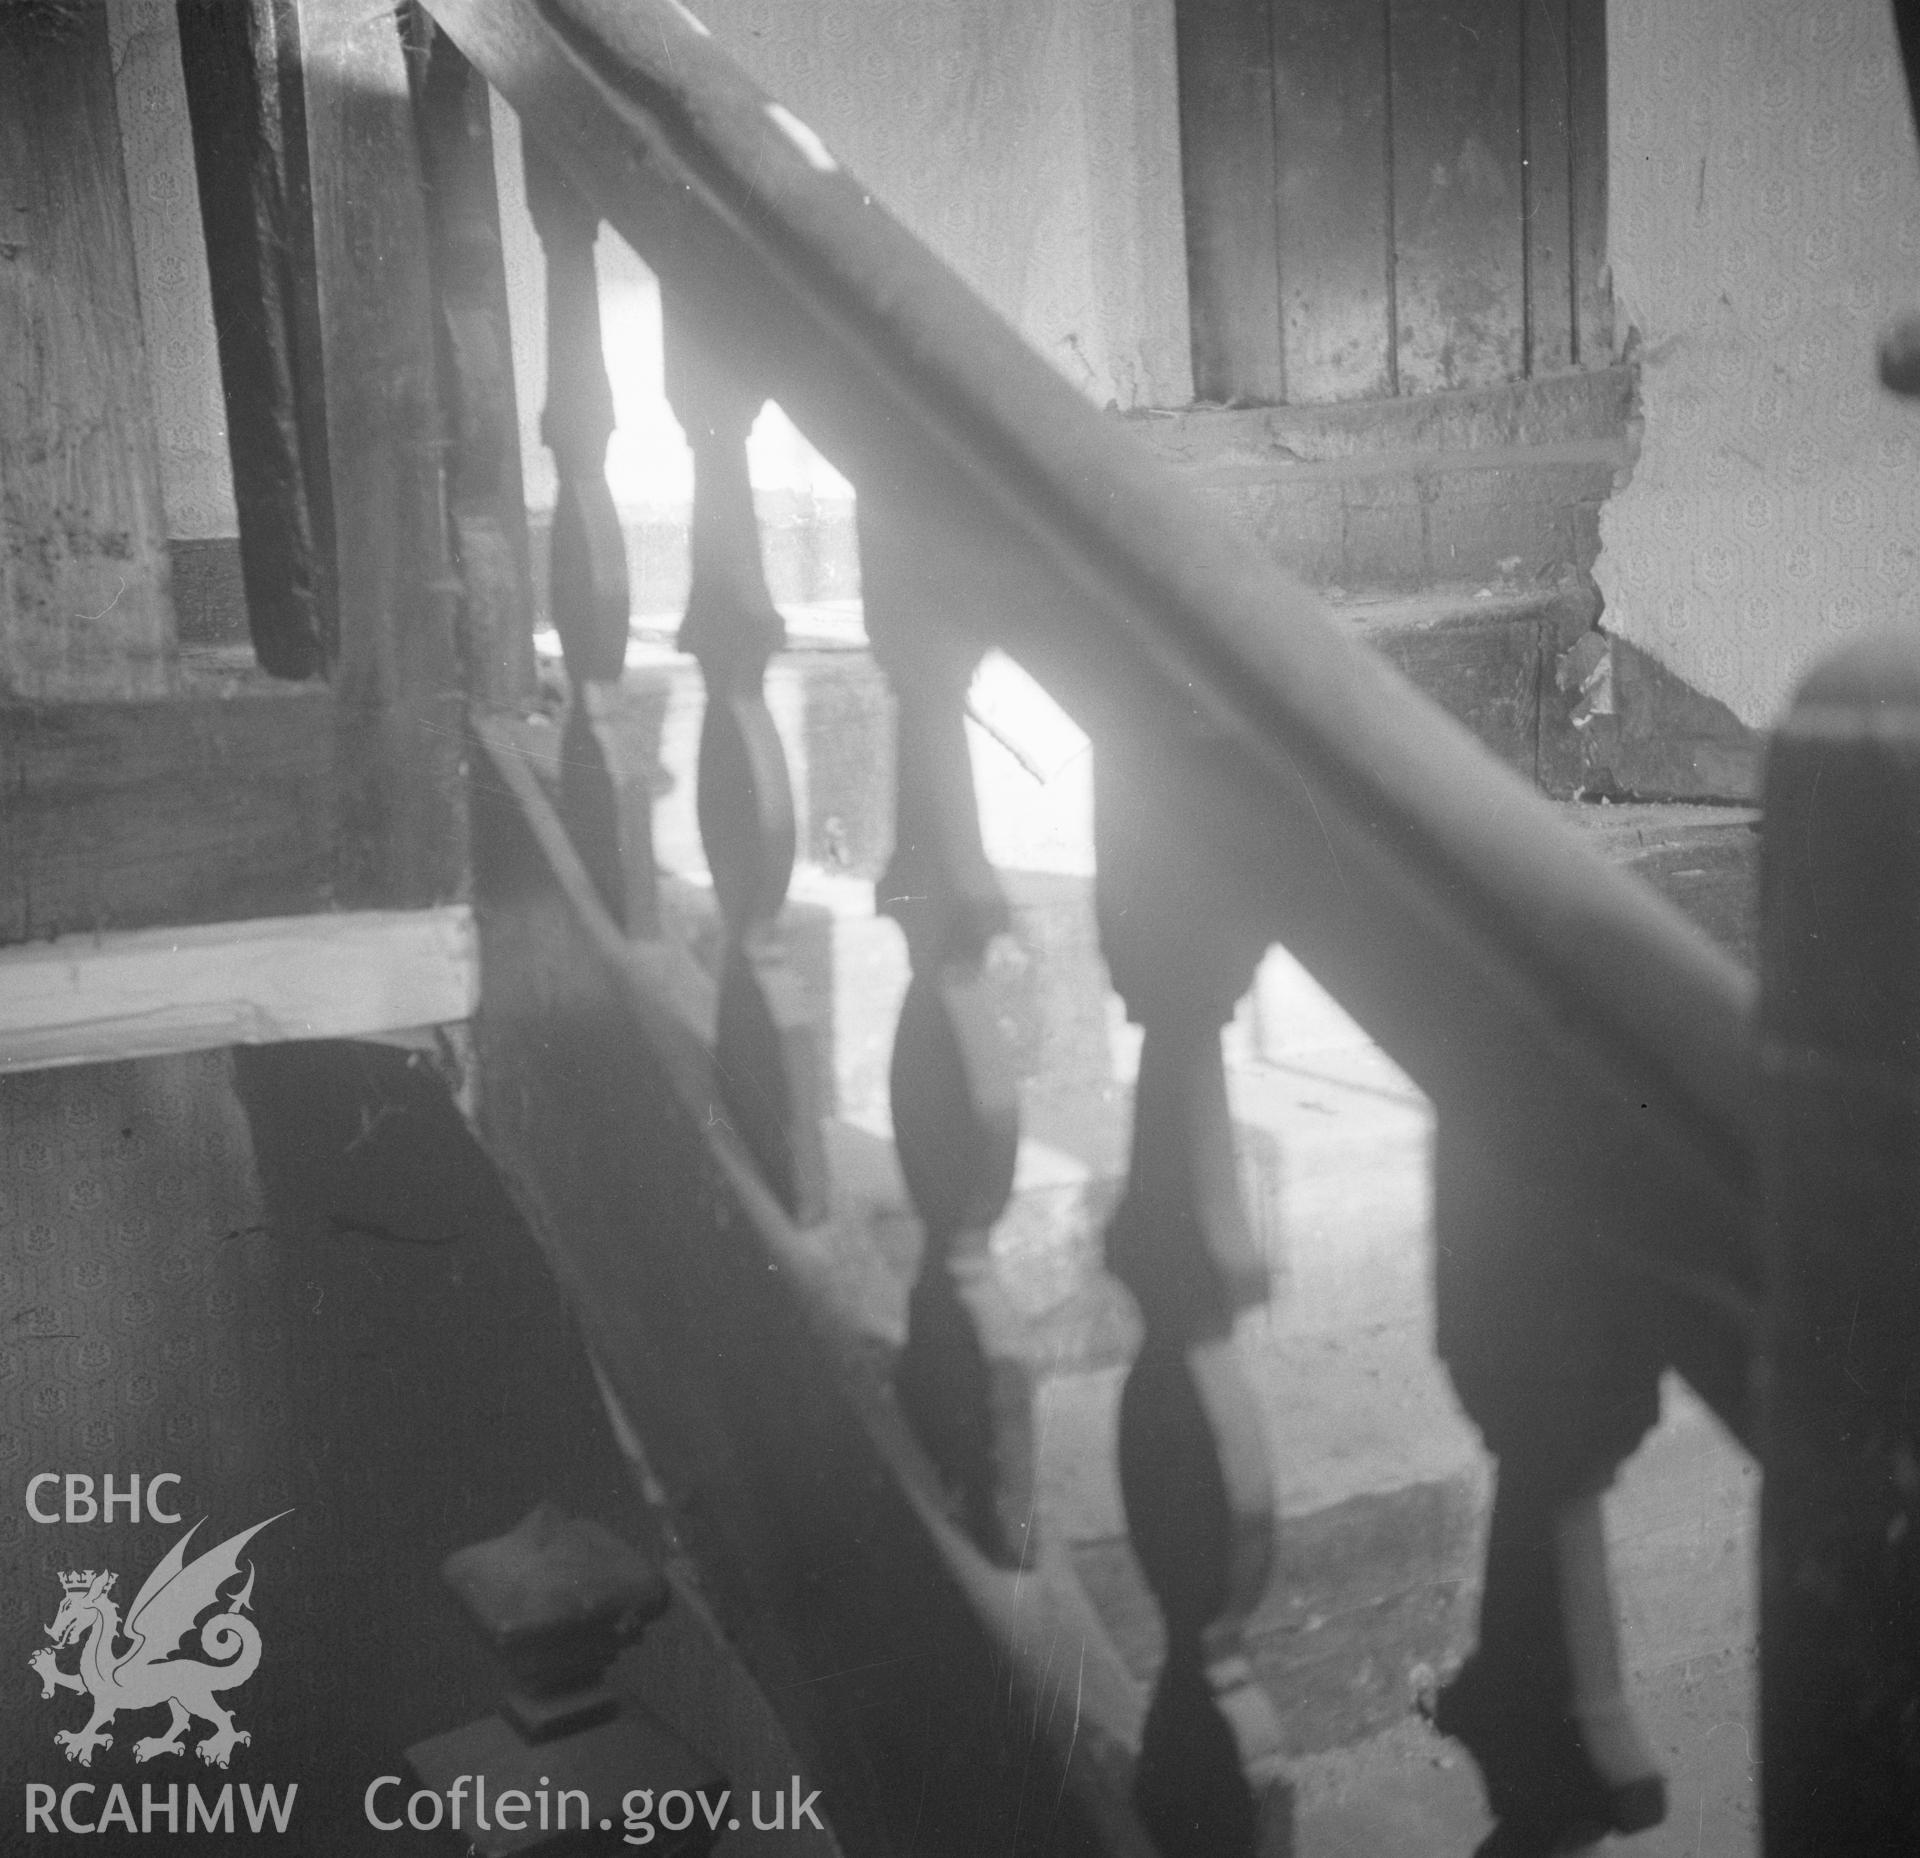 Black and white acetate negative showing interior detail of balustrade, Trimley Hall, Llanfynydd.